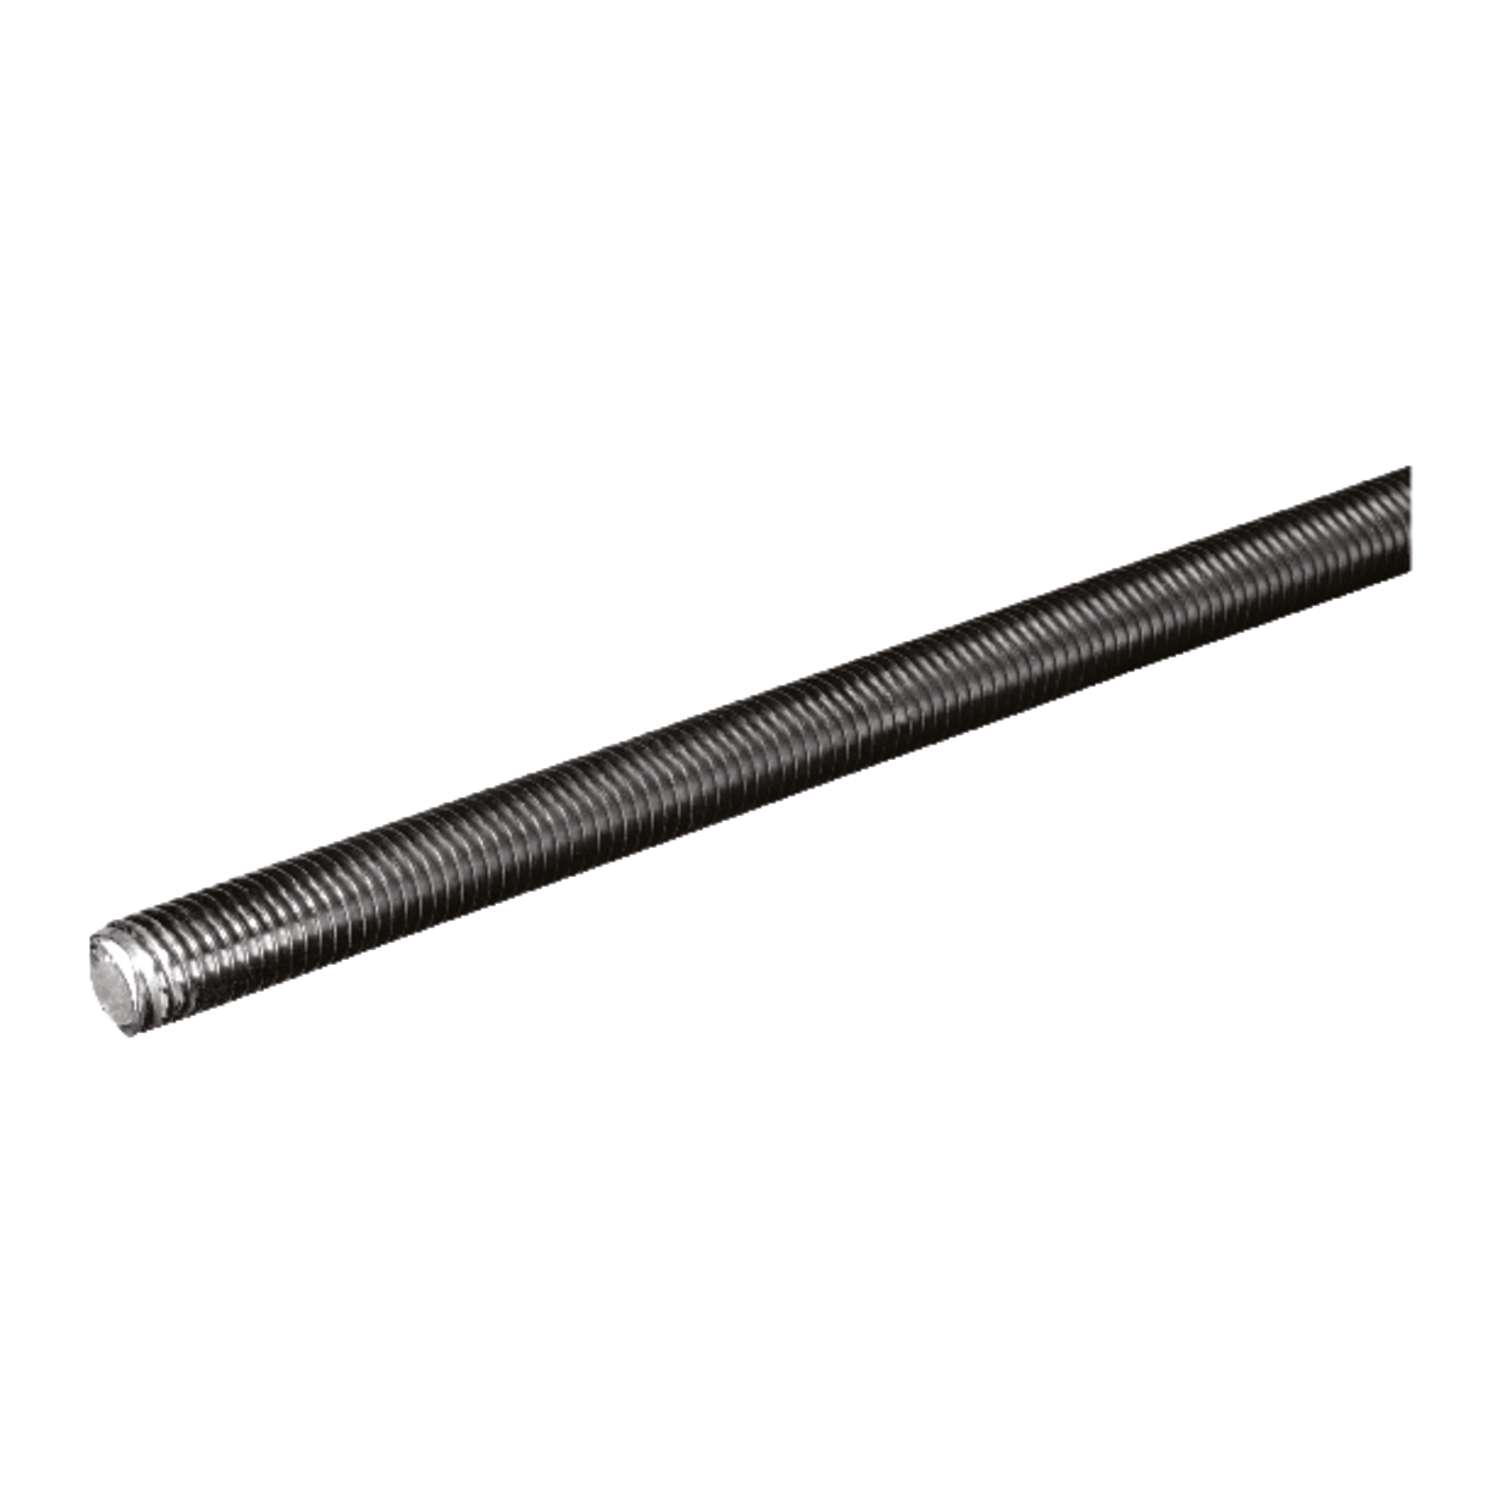 Stainless-Steel Threaded Rod 1/4 In.-20 Tpi X 36 In